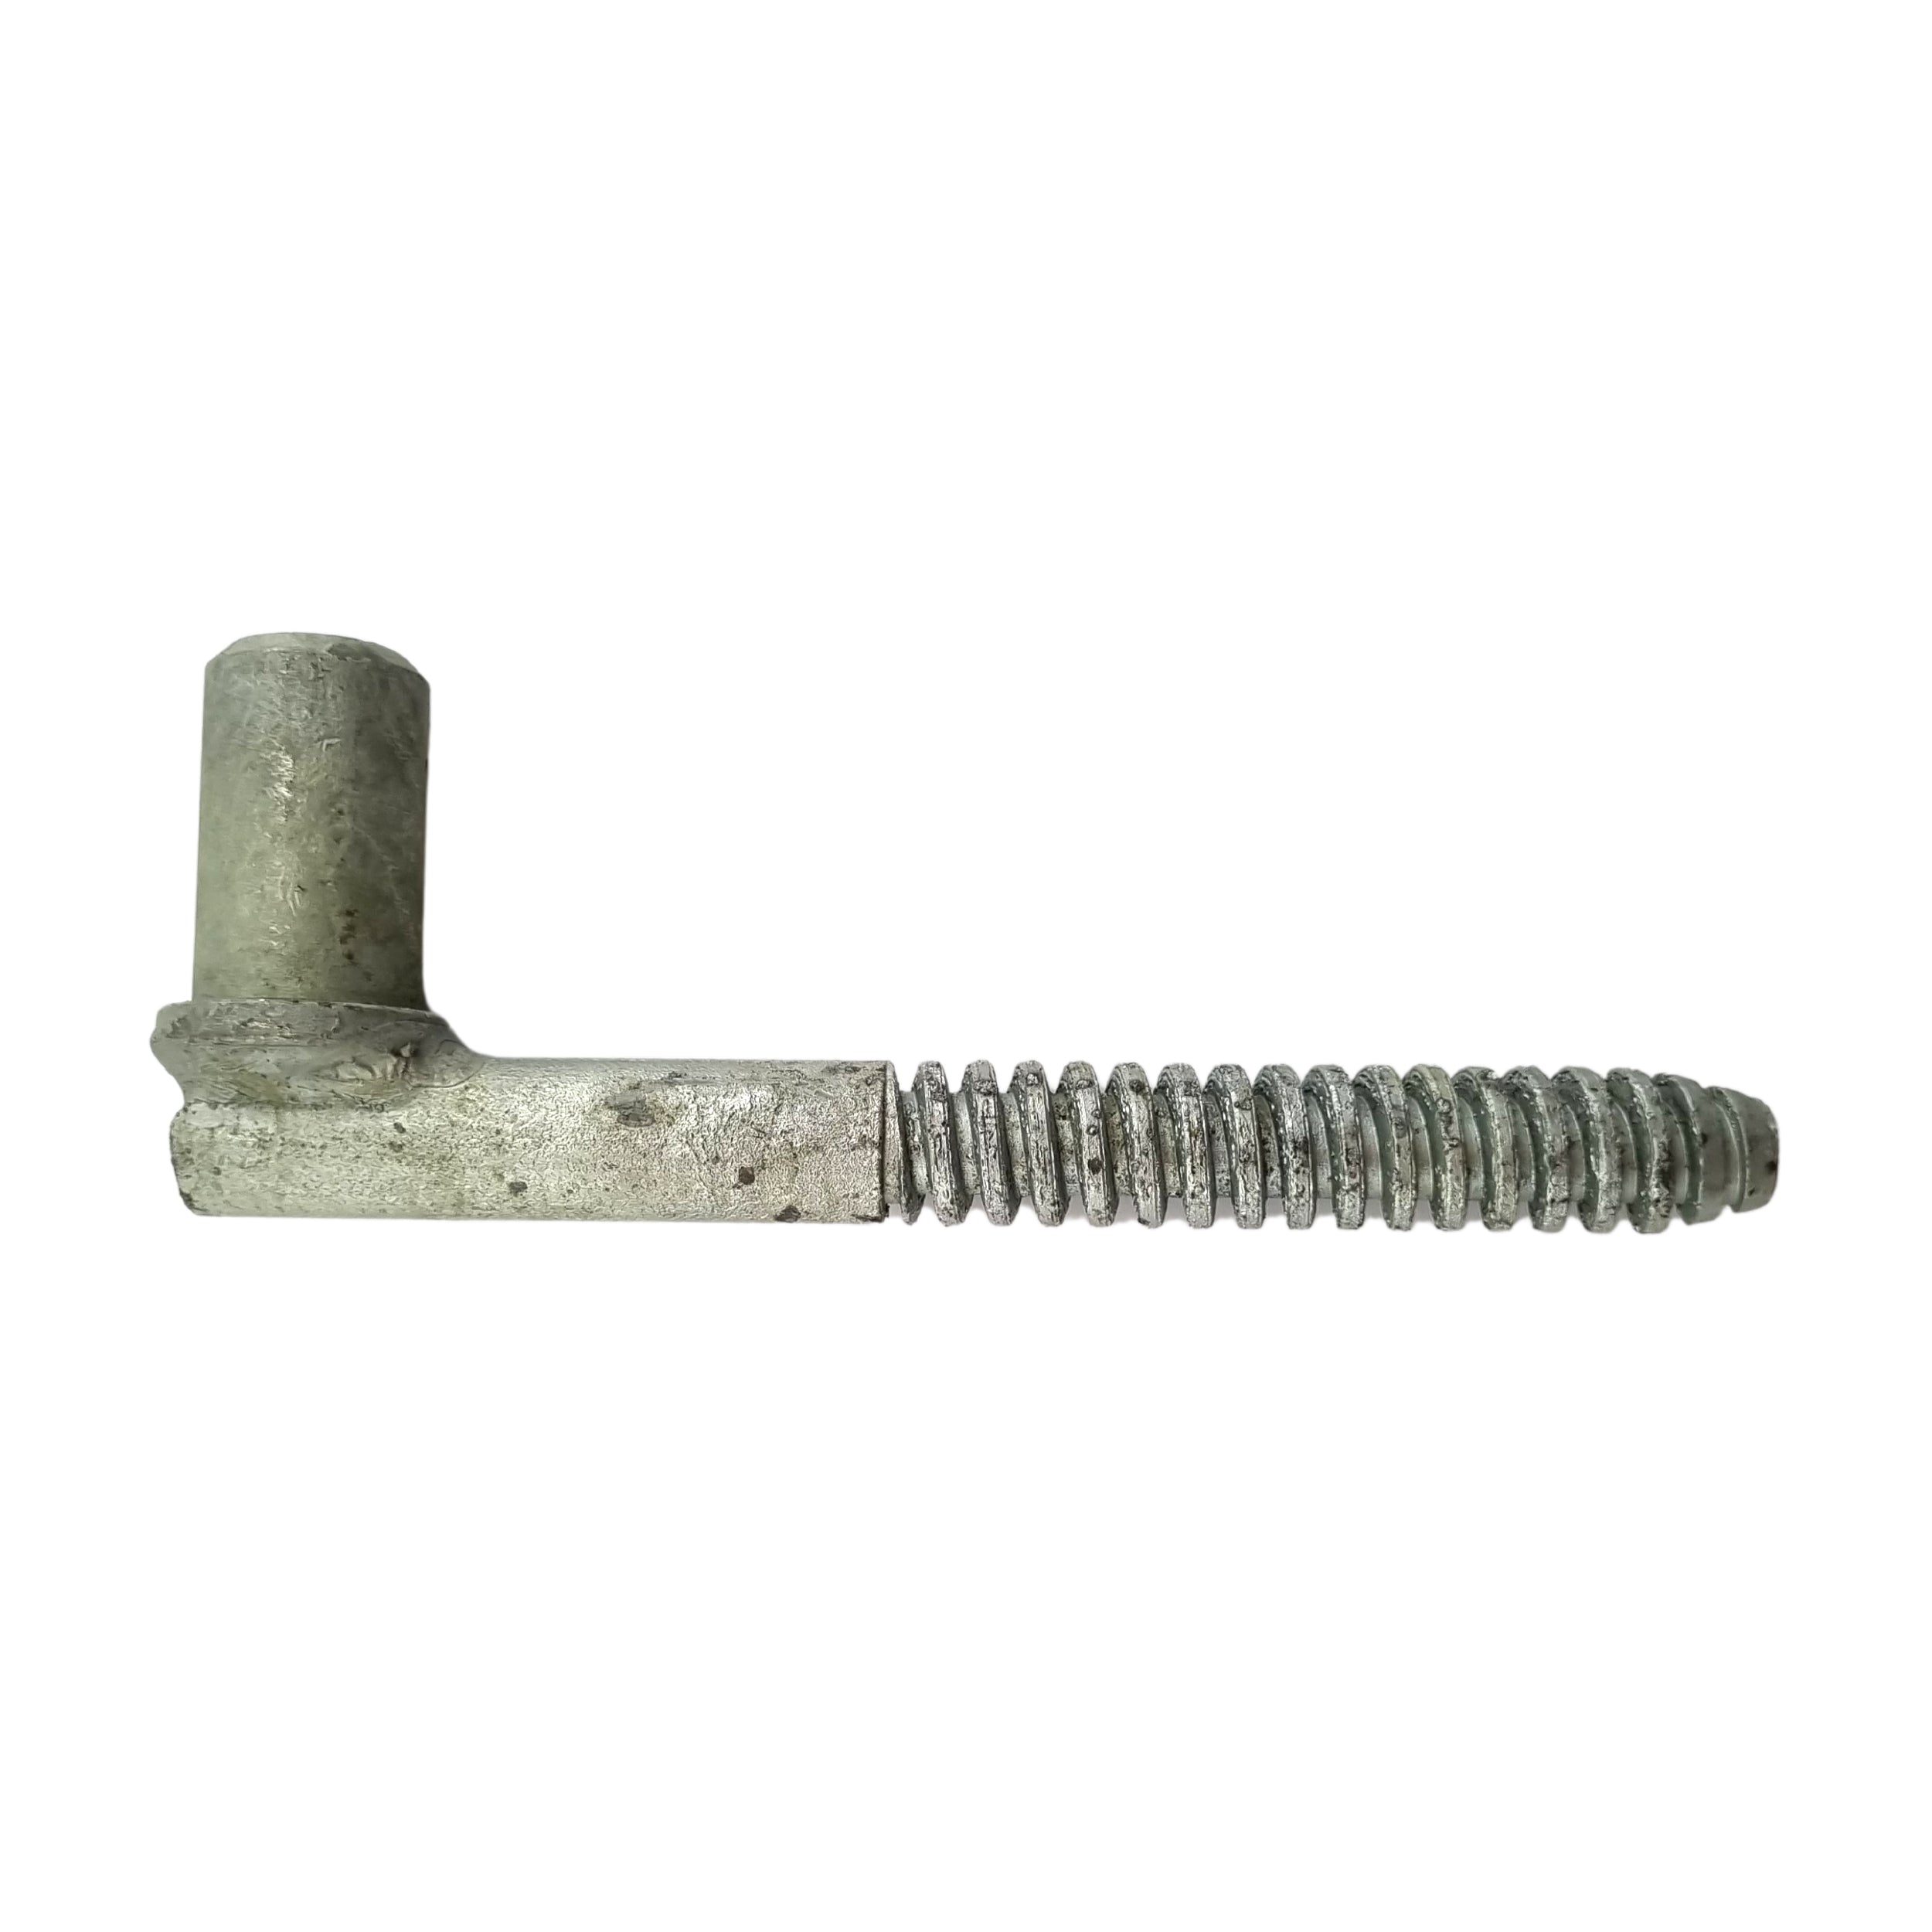 Timber Post Gudgeon - Screw In - Galvanised. Fence & Gate Fittings. Shop online chain.com.au. Australia wide shipping.